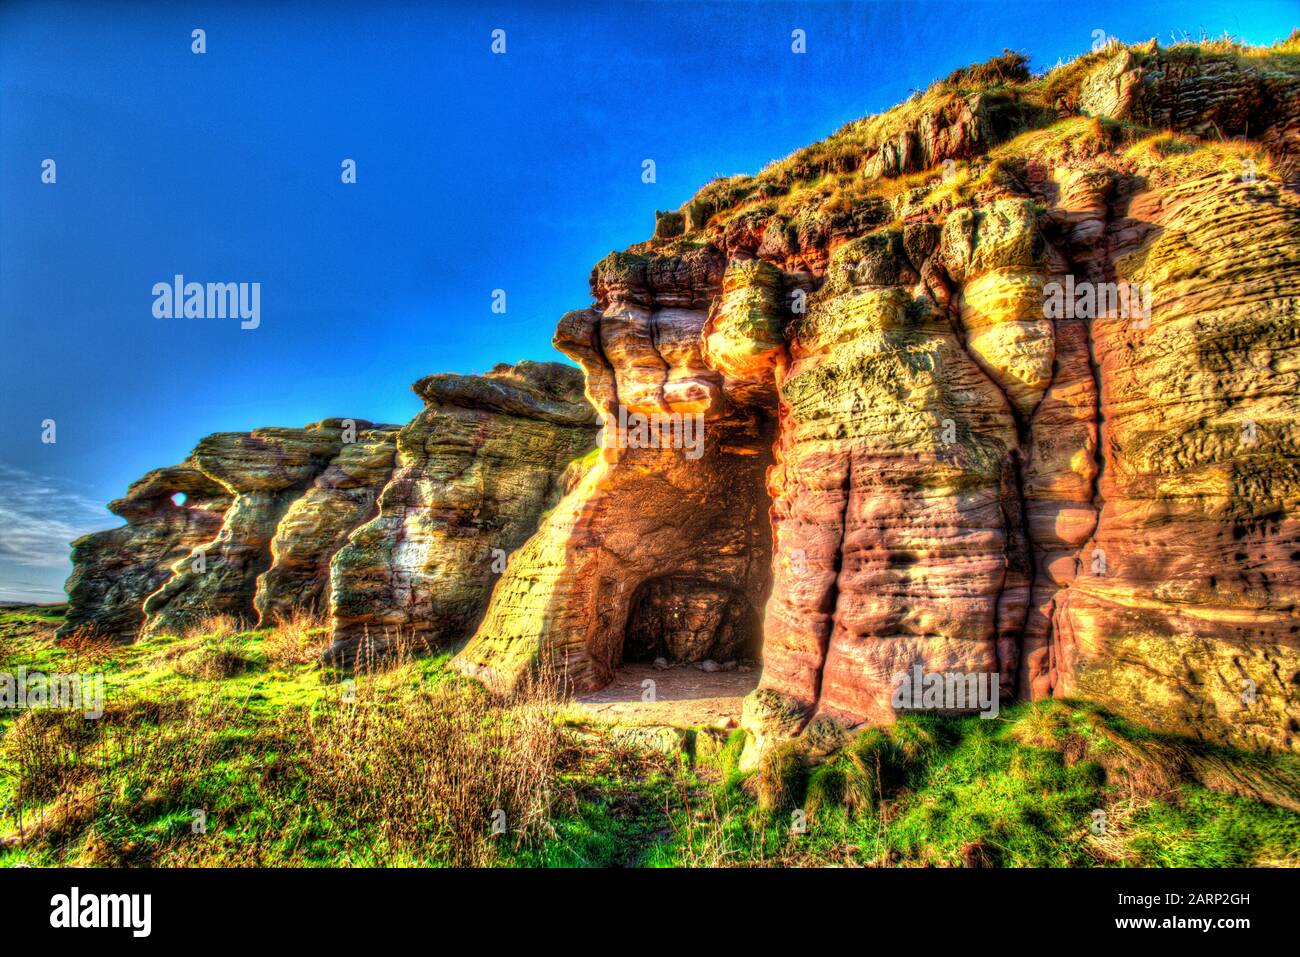 Fife Coastal Path, Scotland. Artistic view of the Caiplie Caves on the Fife Coastal Path between the villages of Anstruther and Crail. Stock Photo